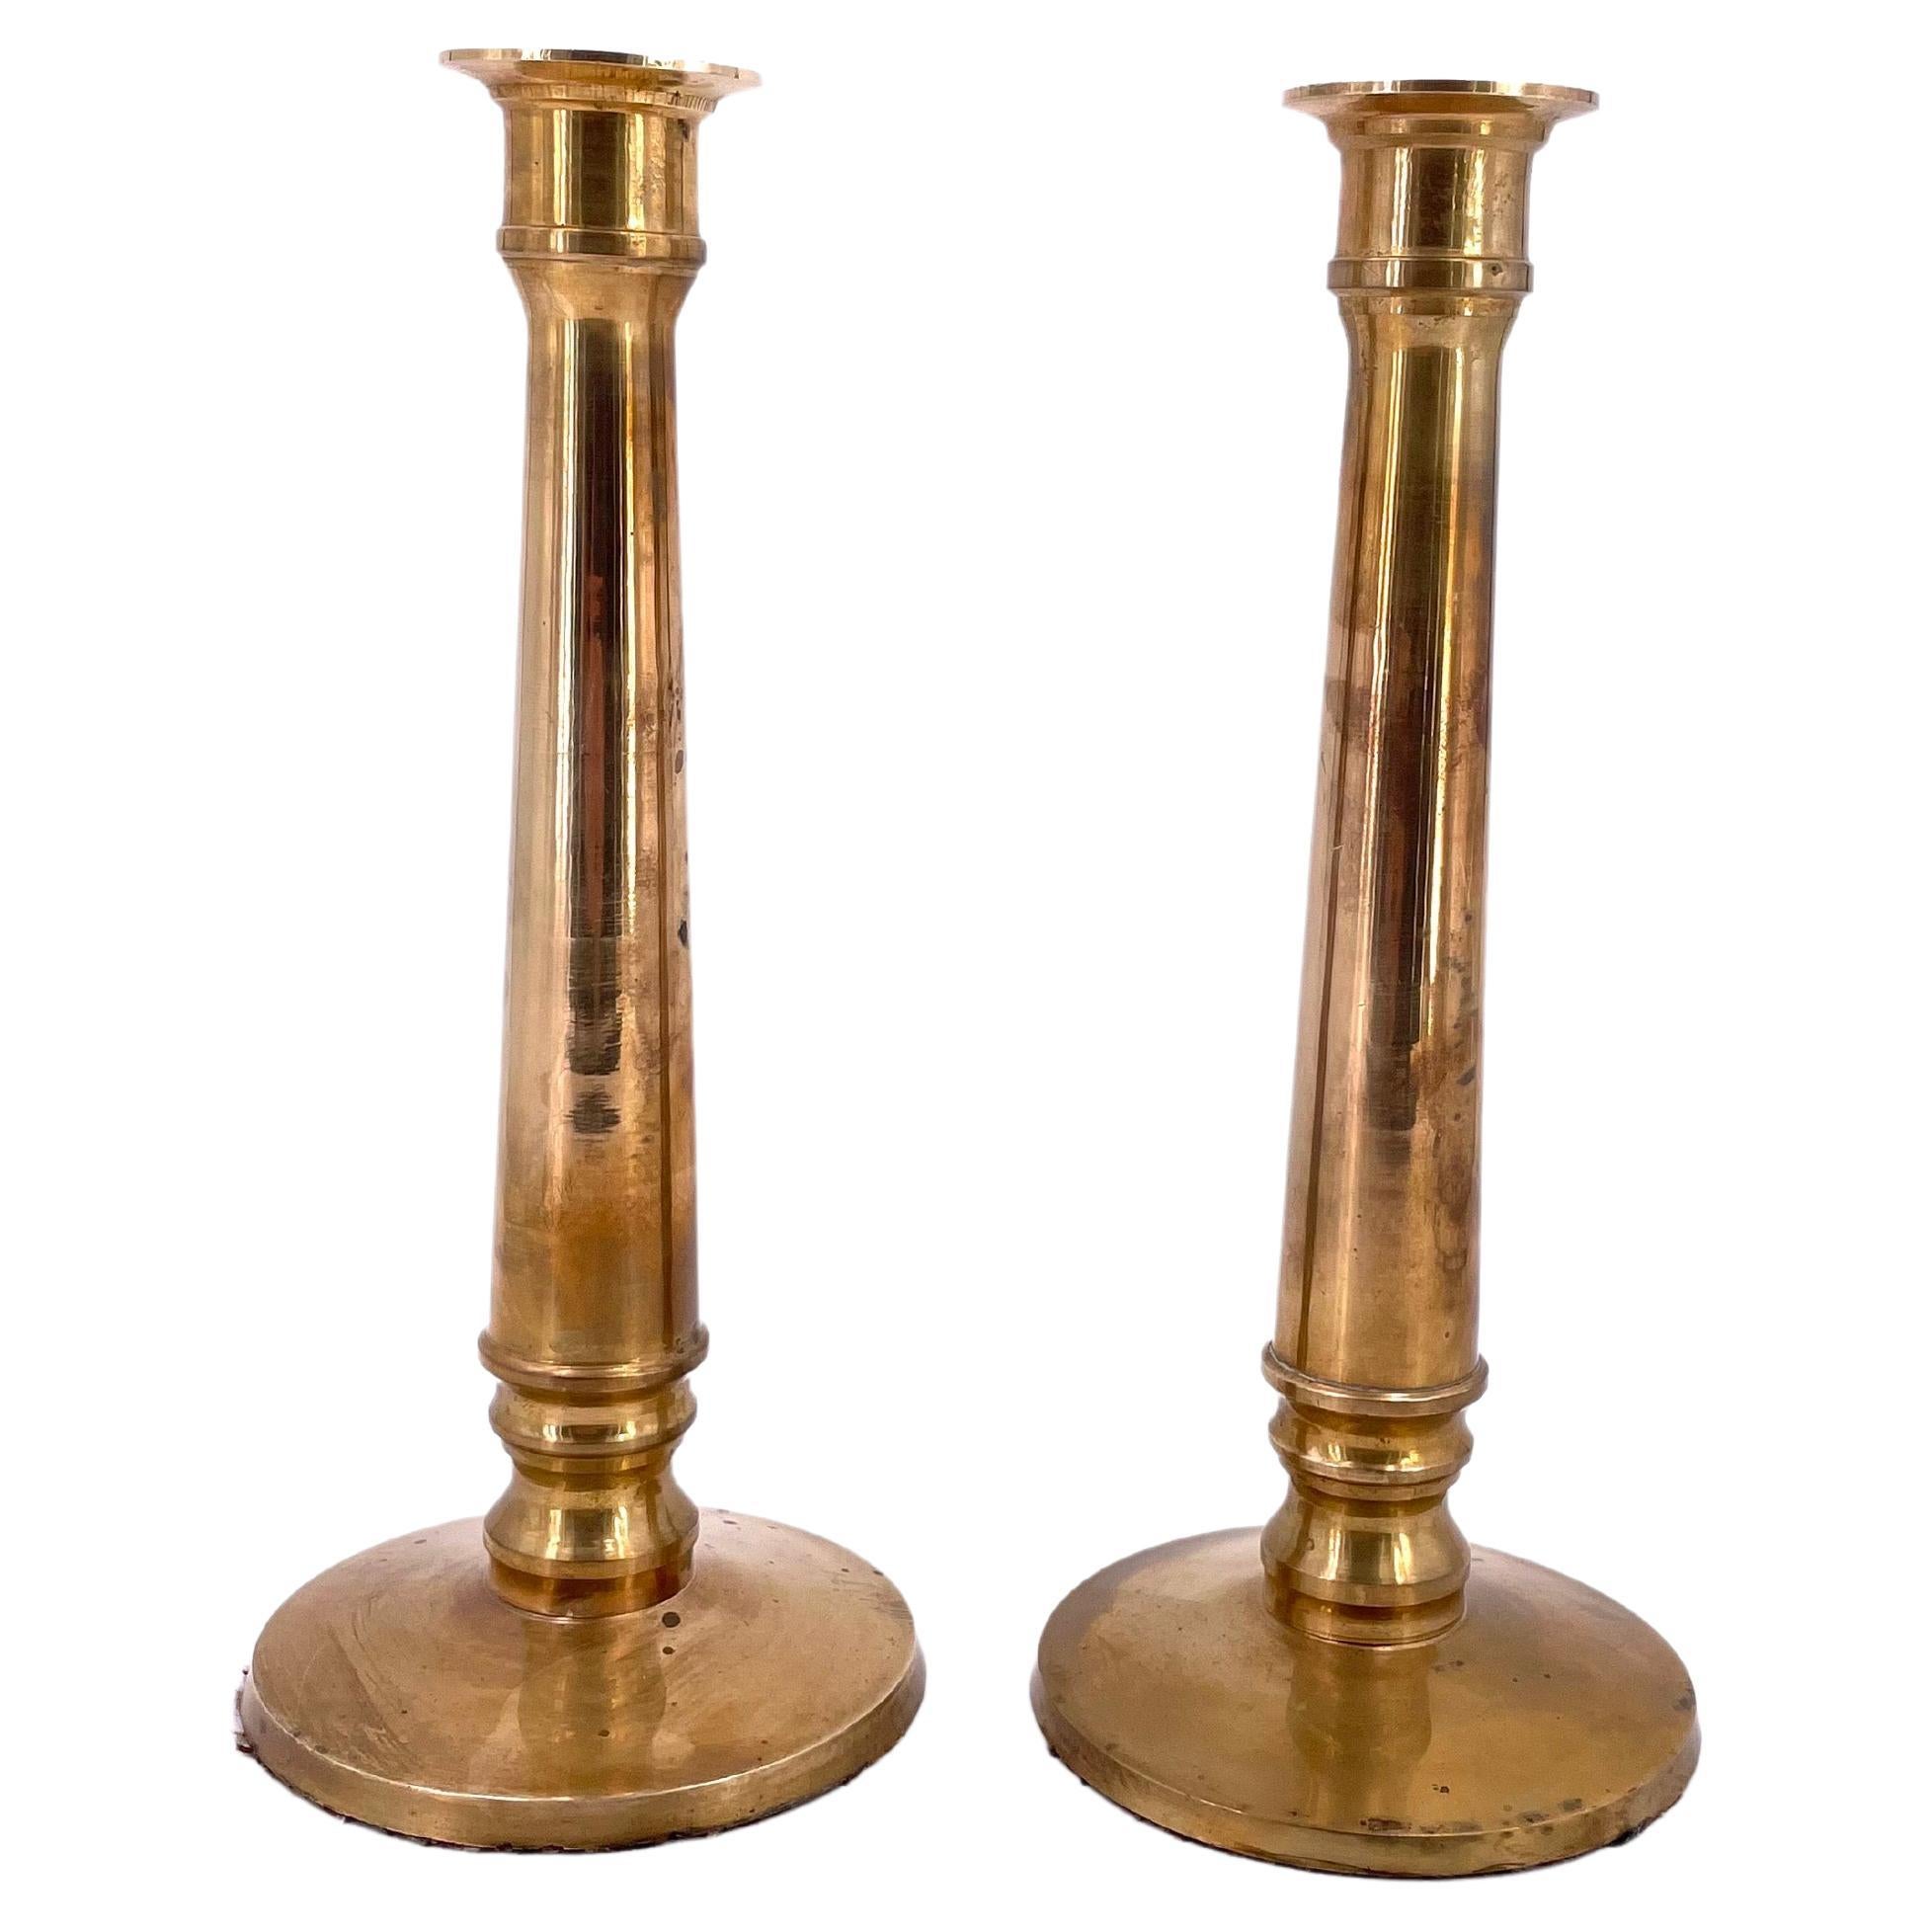 Tall Pair of Hollywood Regency Solid Brass Candle Holders by Ralph Lauren